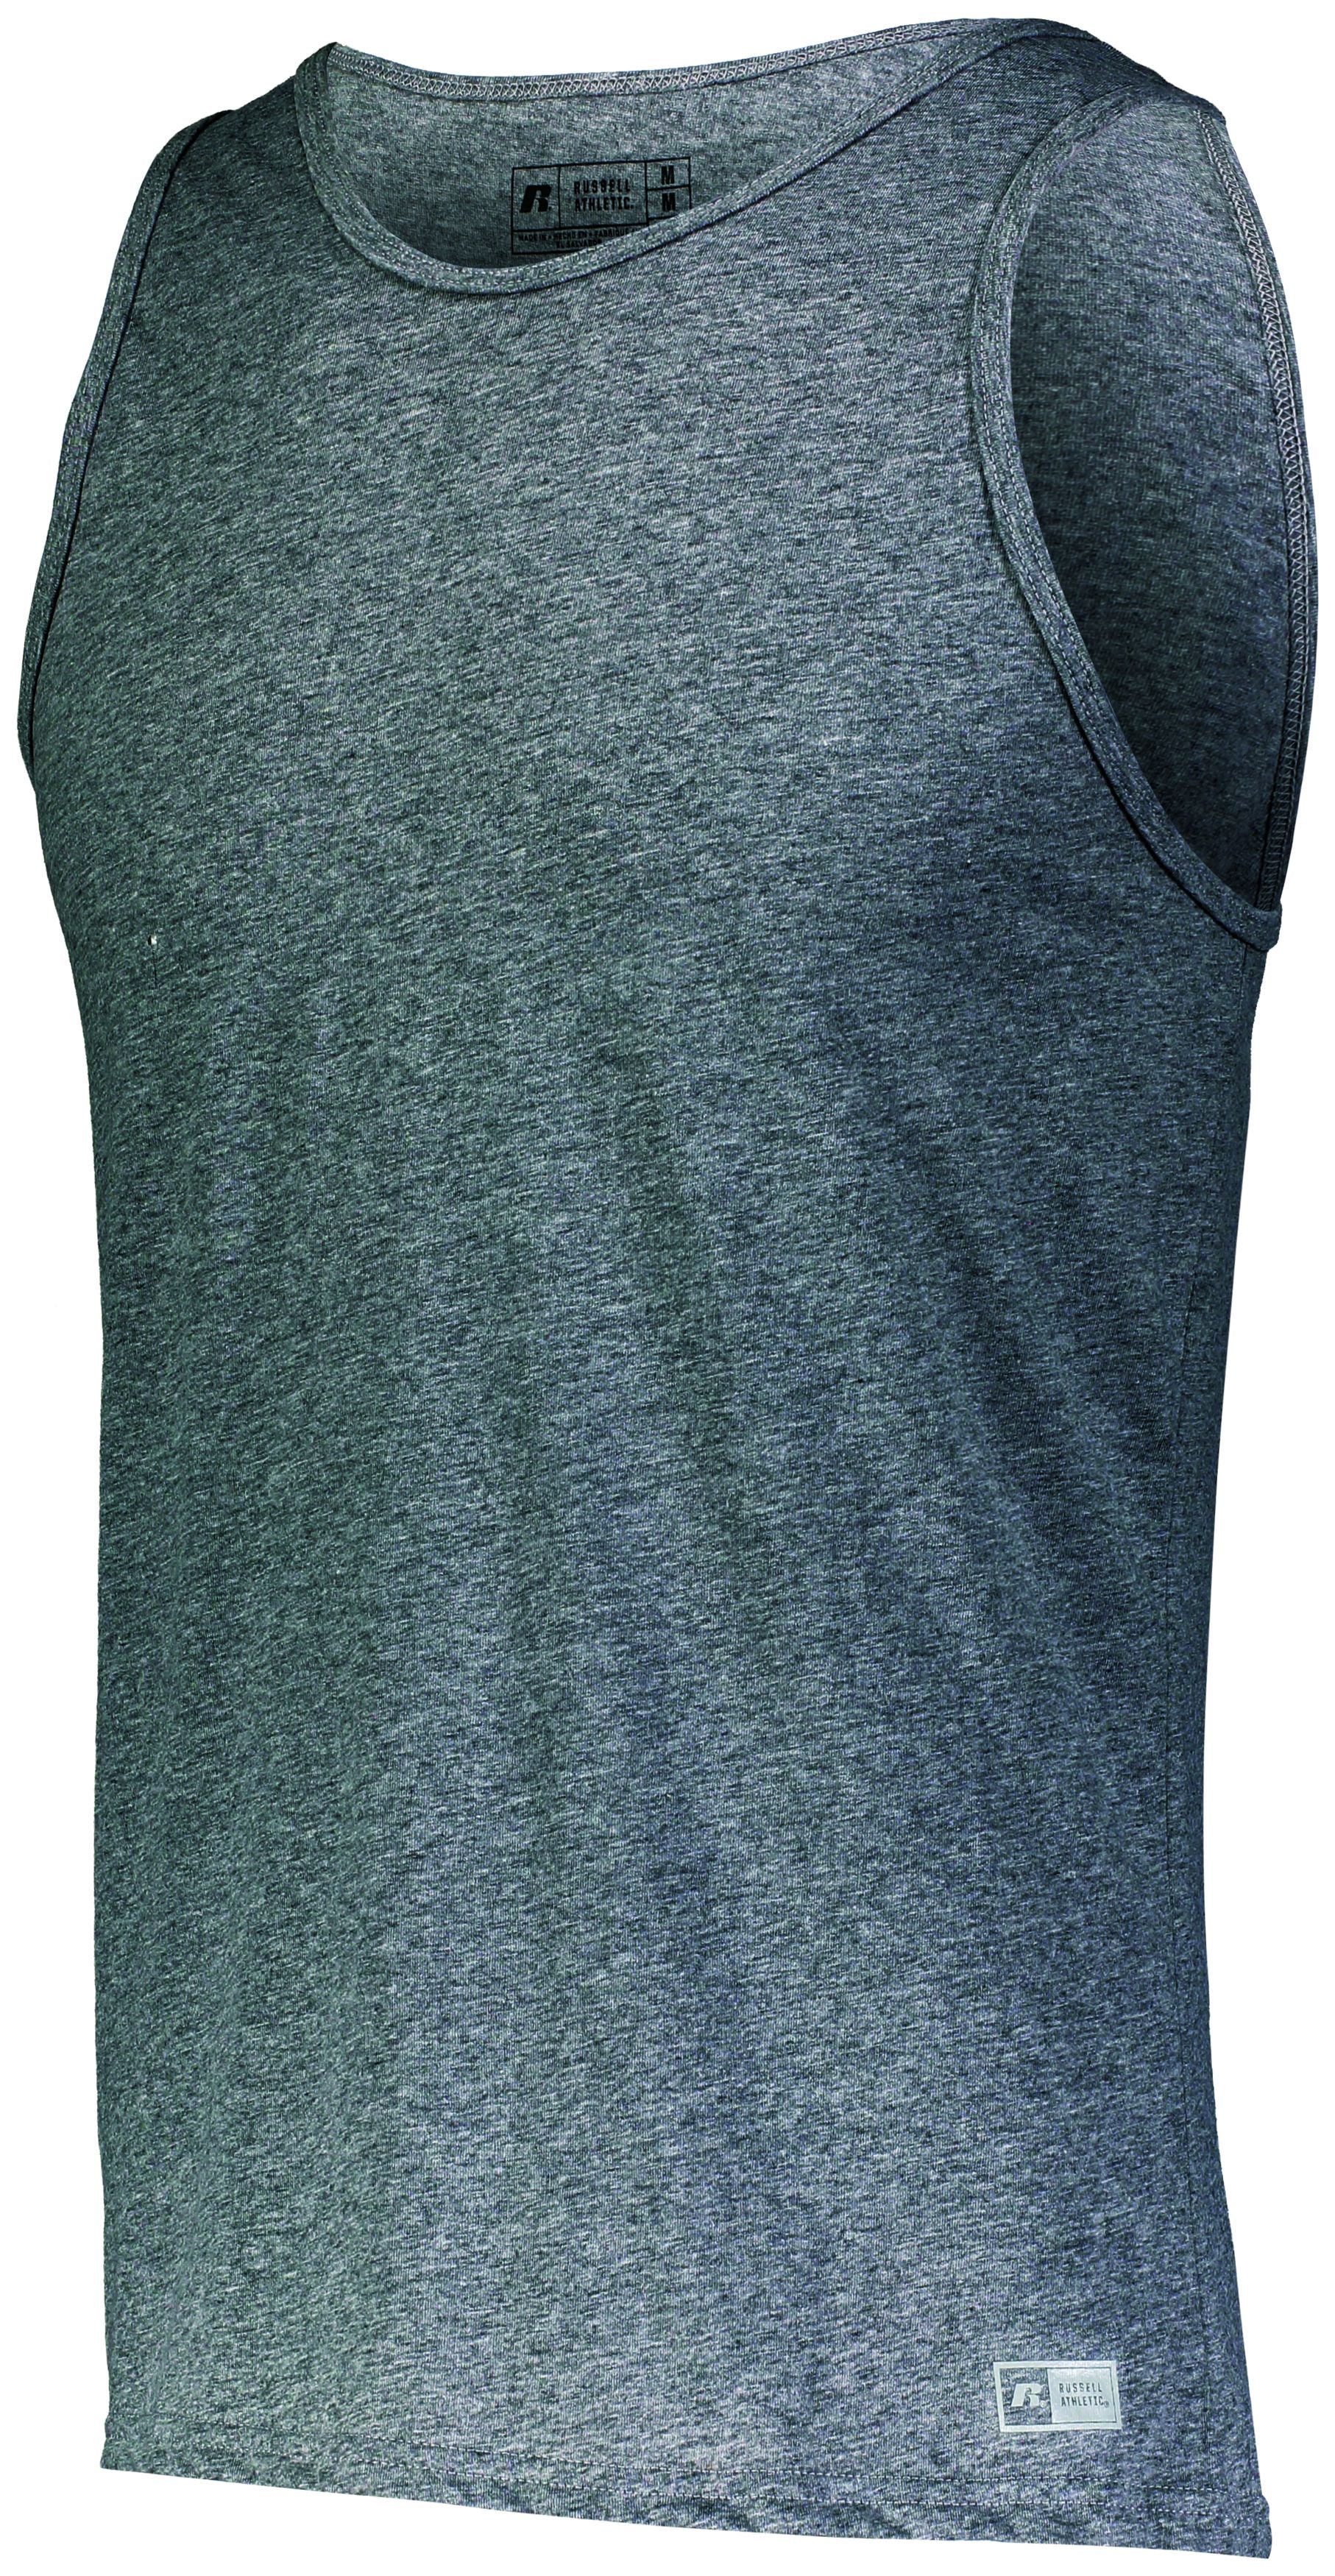 Russell Athletic Essential Tank in Black Heather  -Part of the Adult, Adult-Tank, Russell-Athletic-Products, Shirts product lines at KanaleyCreations.com